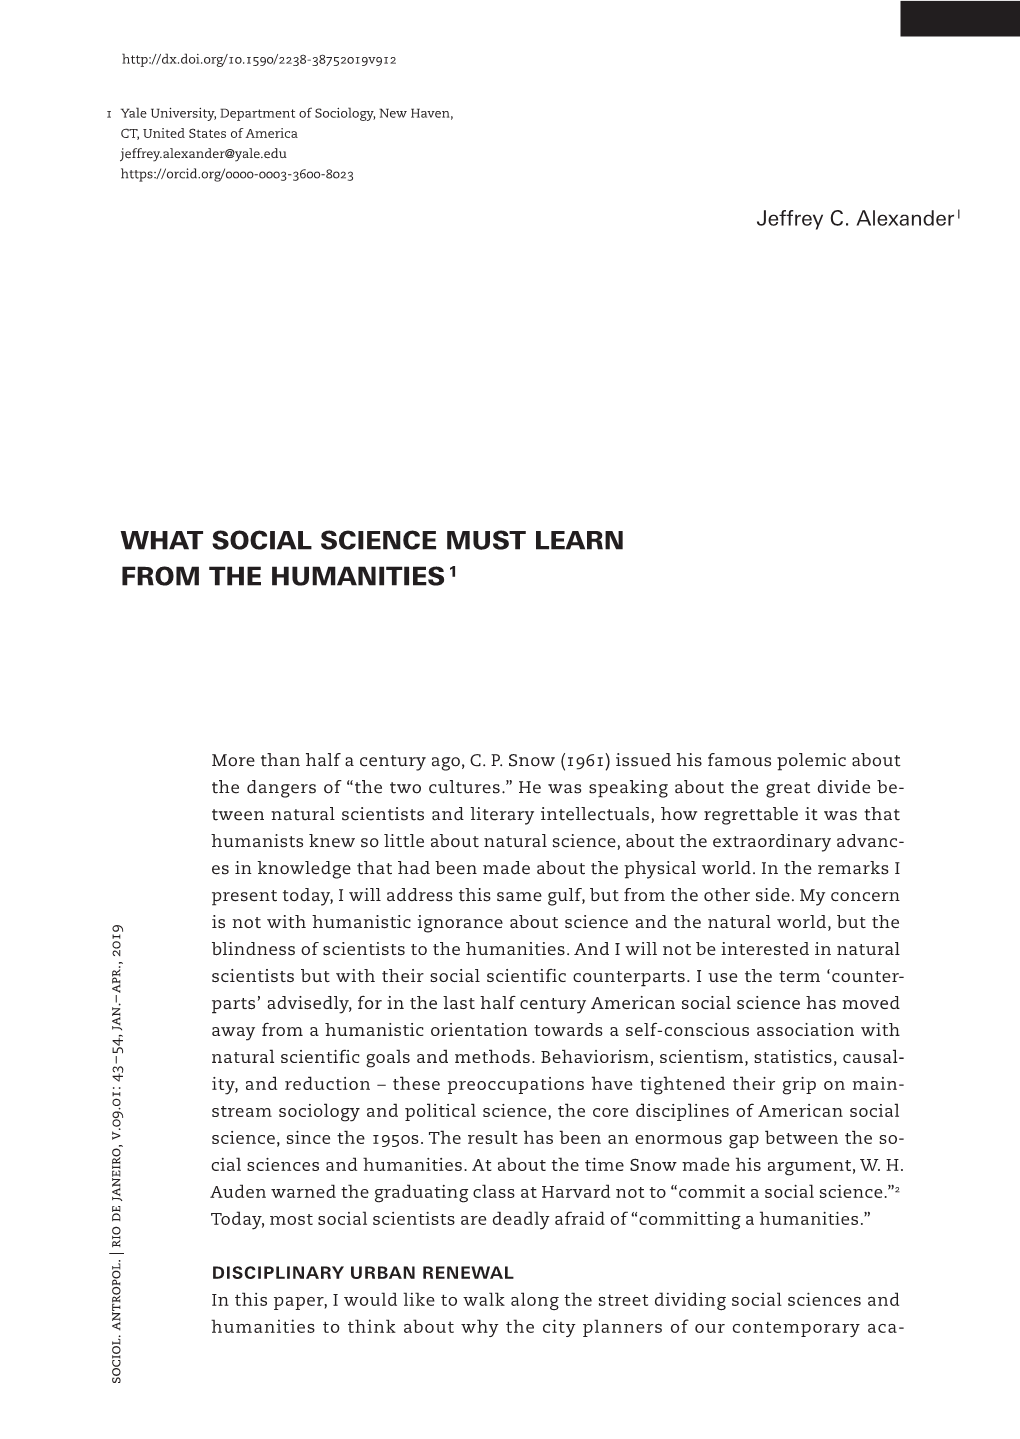 What Social Science Must Learn from the Humanities 1